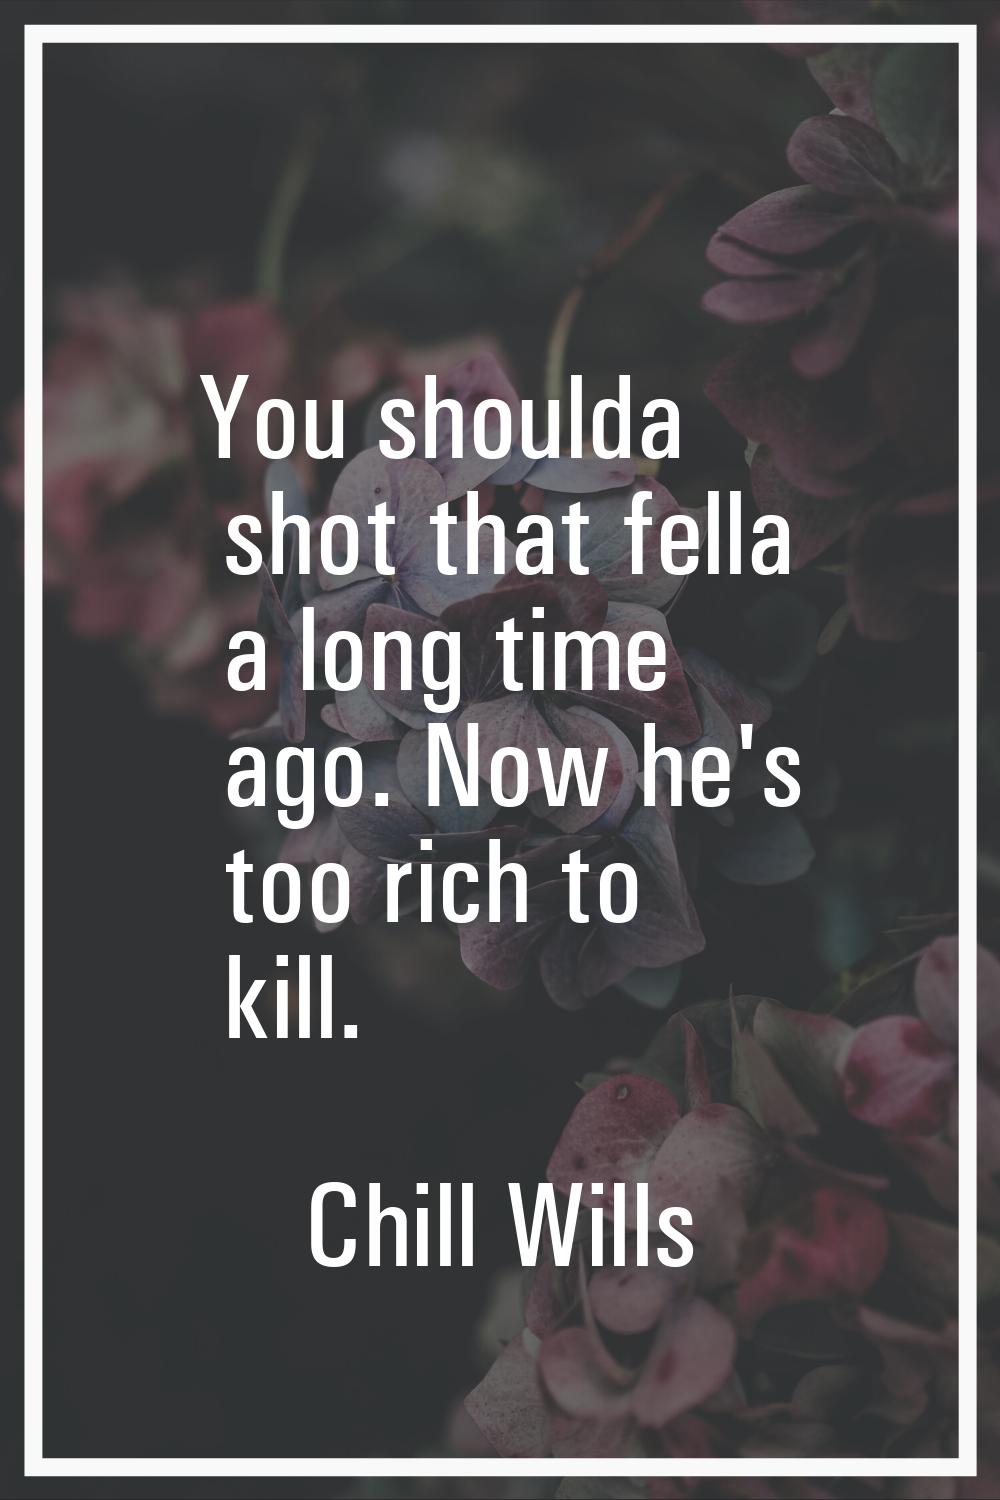 You shoulda shot that fella a long time ago. Now he's too rich to kill.